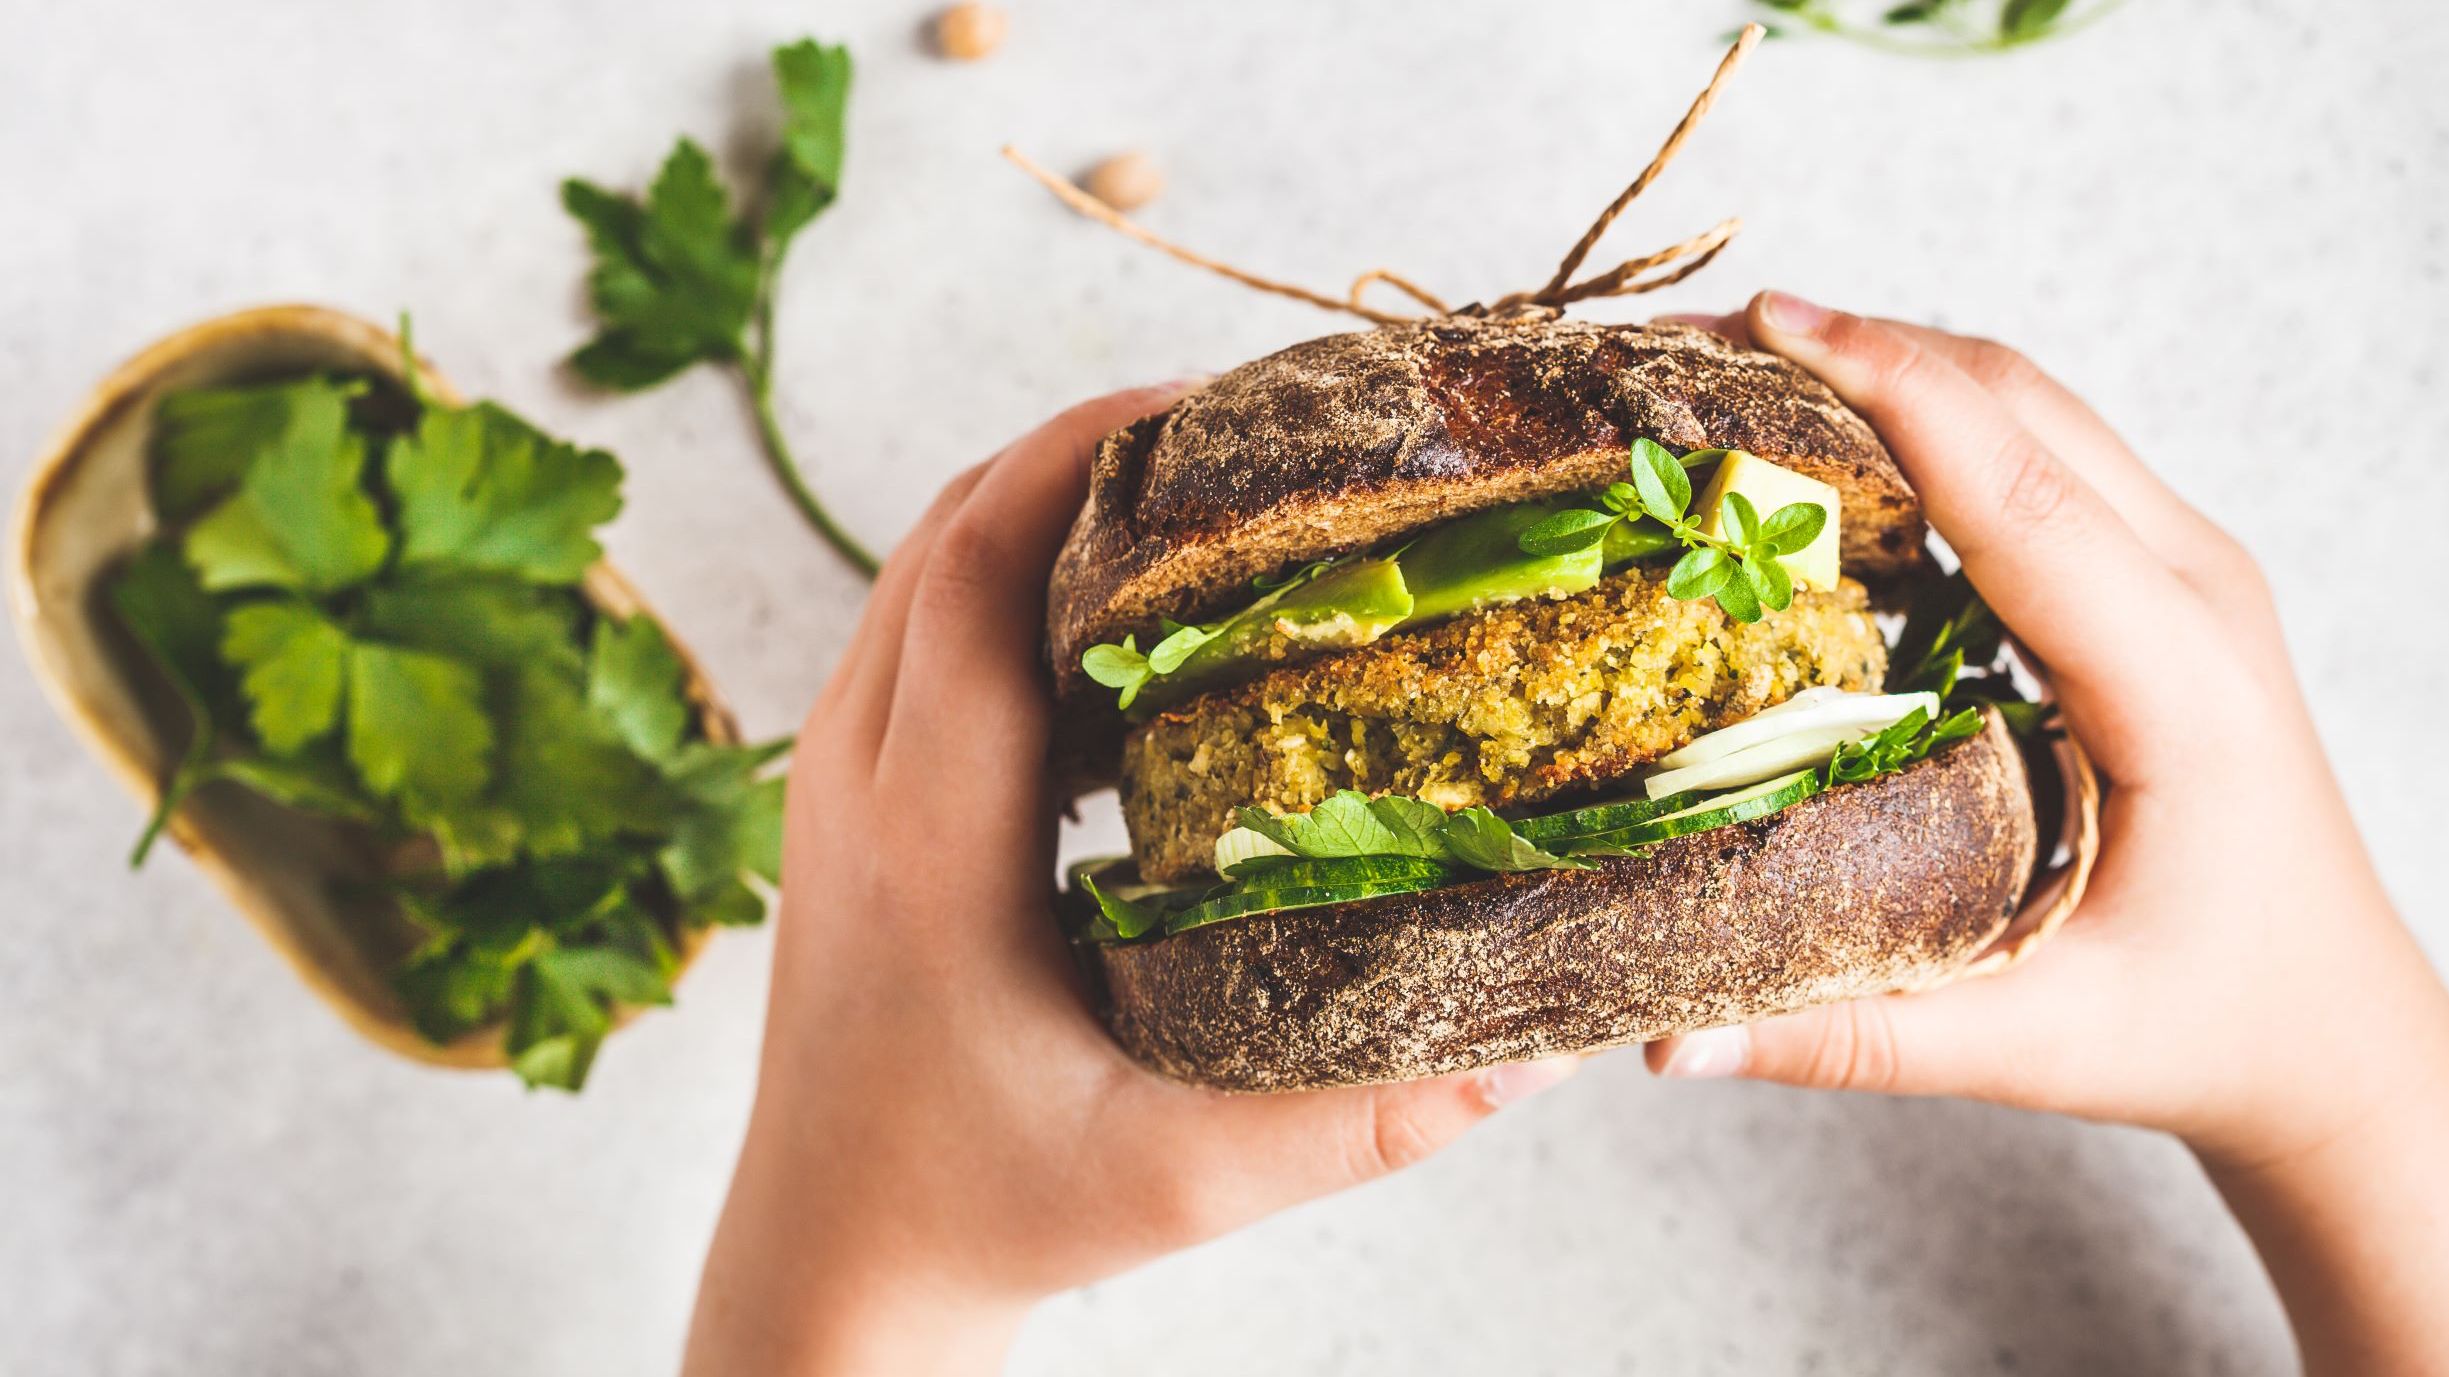 Fresh shoots of growth: why plant-based foods is the trend to watch for 2021